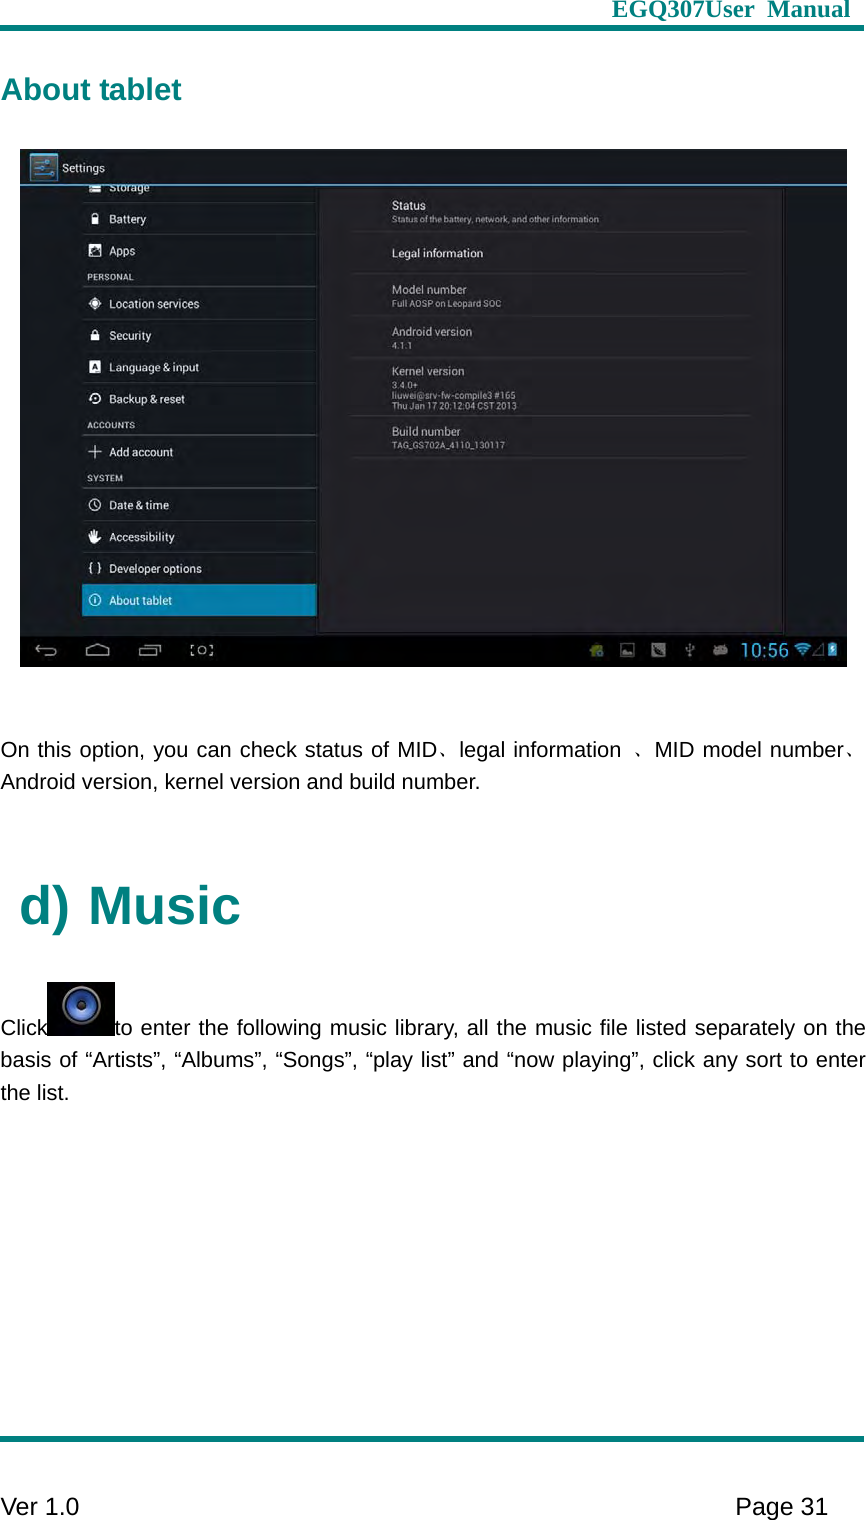                     EGQ307User Manual     Ver 1.0    Page 31  About tablet   On this option, you can check status of MID、legal information 、MID model number、Android version, kernel version and build number.    d) Music Click to enter the following music library, all the music file listed separately on the basis of “Artists”, “Albums”, “Songs”, “play list” and “now playing”, click any sort to enter the list.   